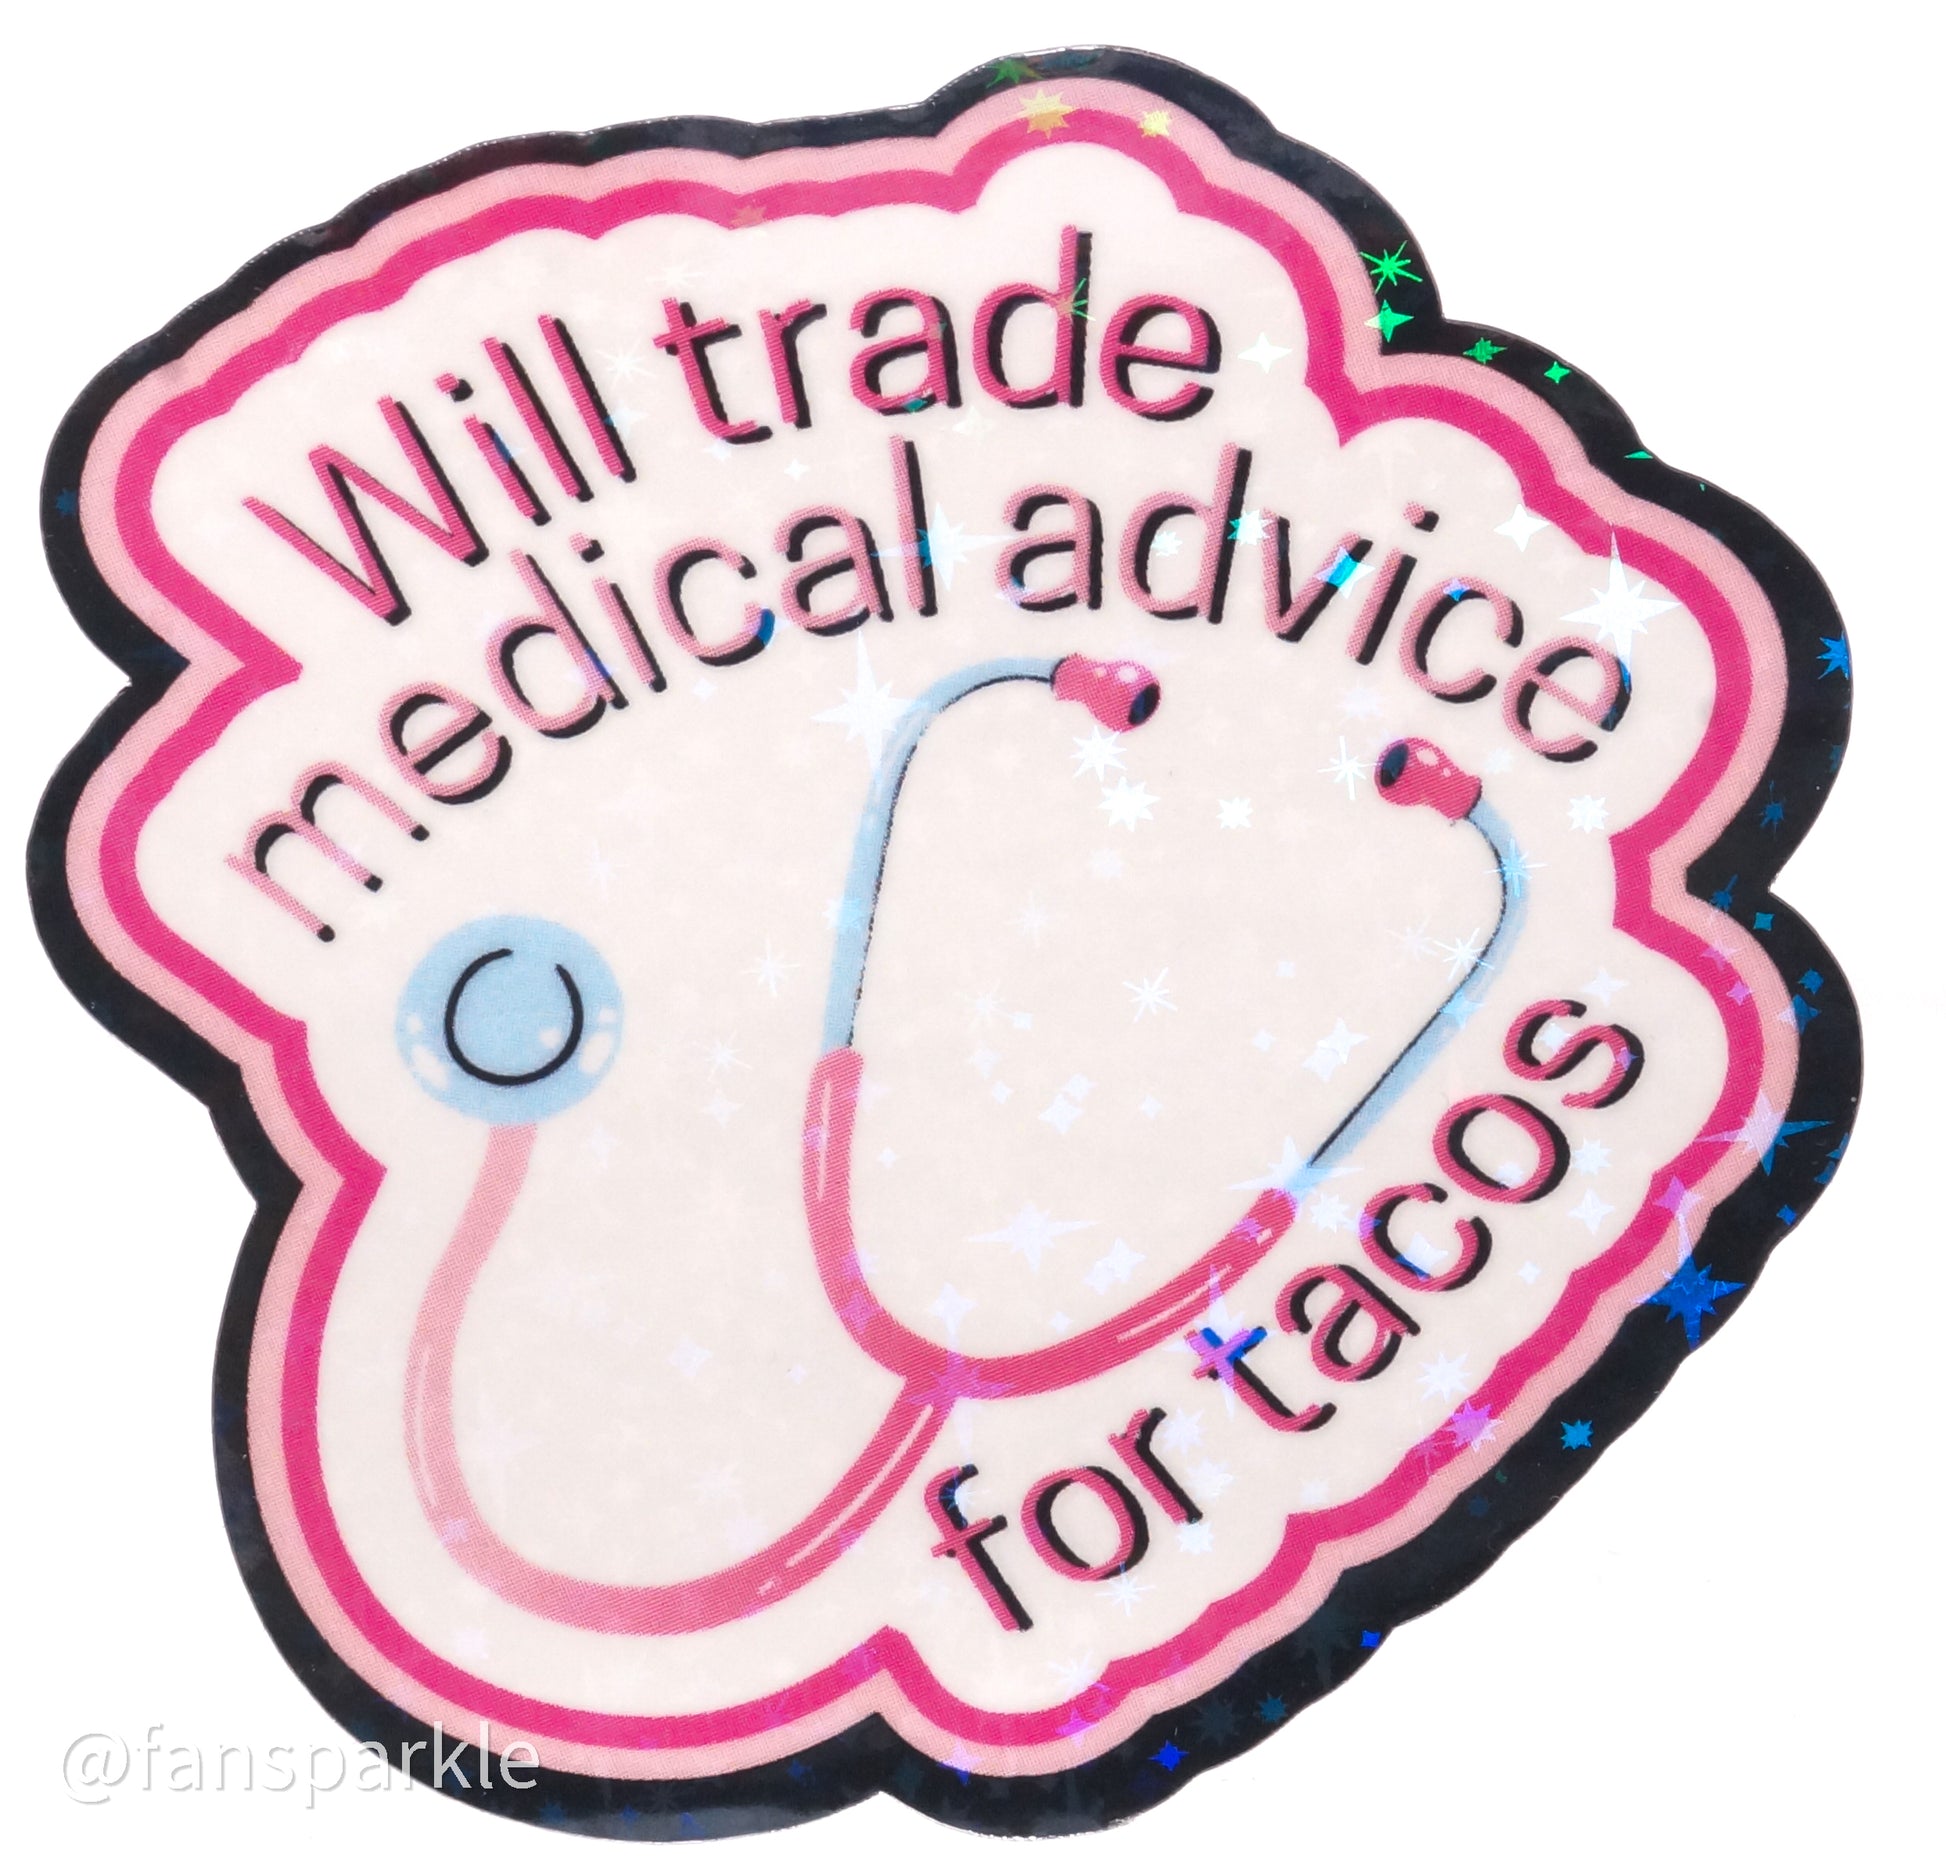 Will Trade Medical Advice For Tacos Sticker - Fan Sparkle